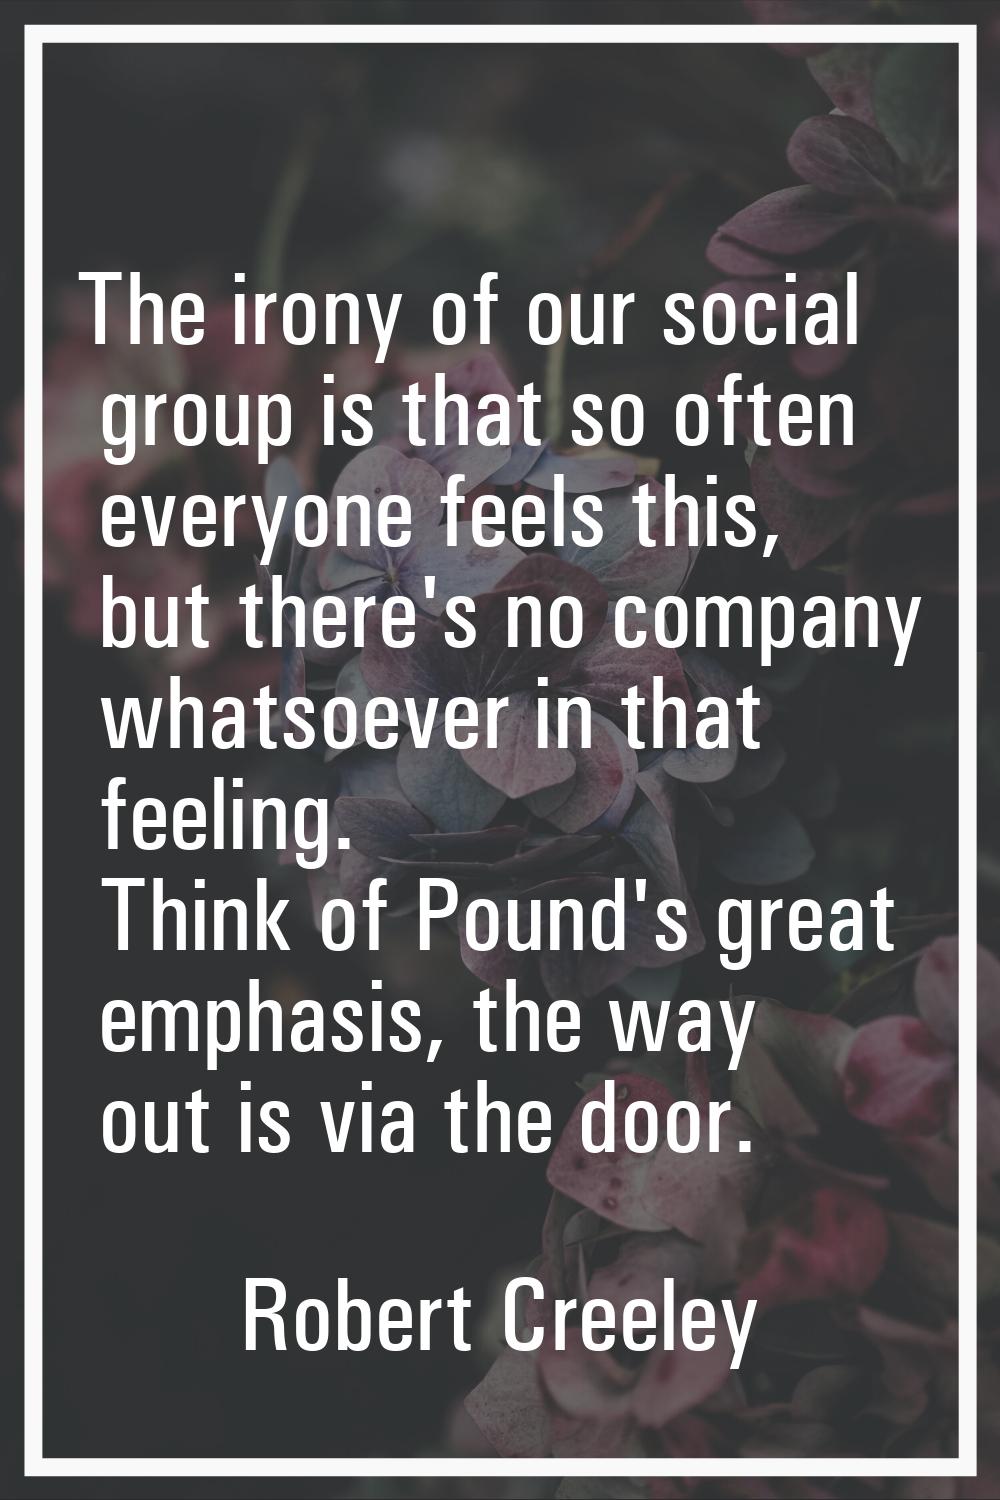 The irony of our social group is that so often everyone feels this, but there's no company whatsoev